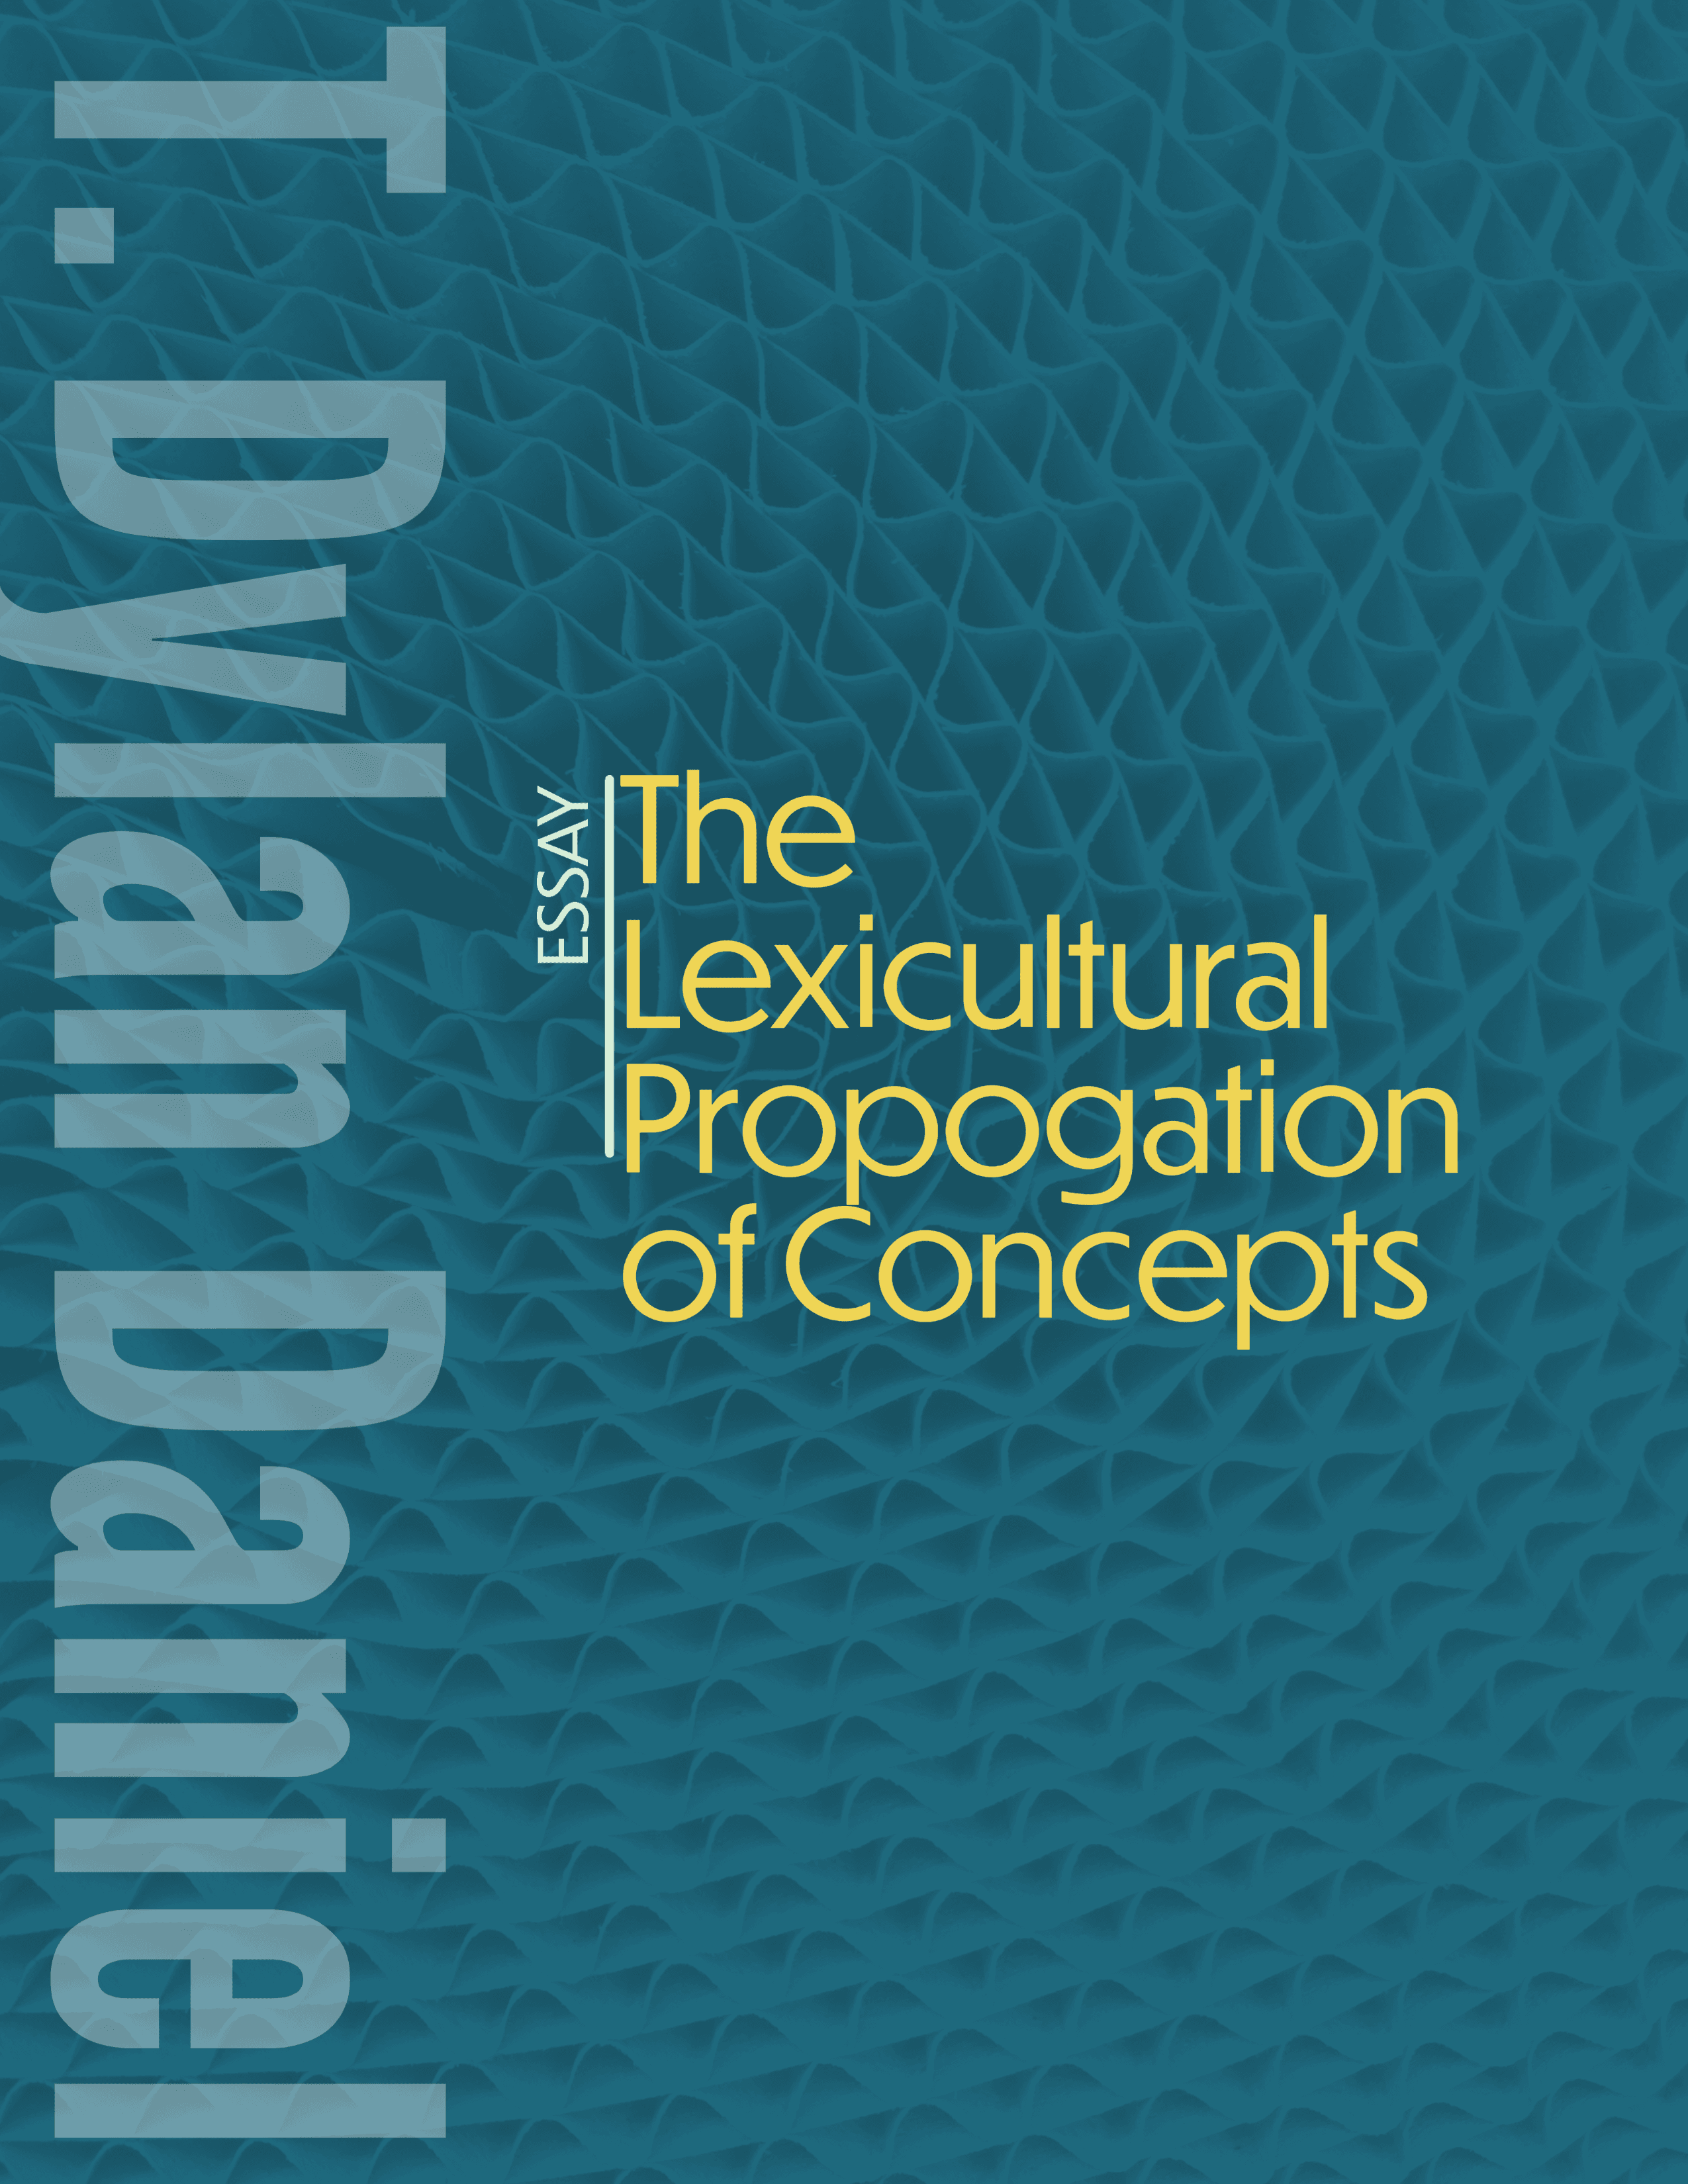 The Lexicultural Propagation of Concepts